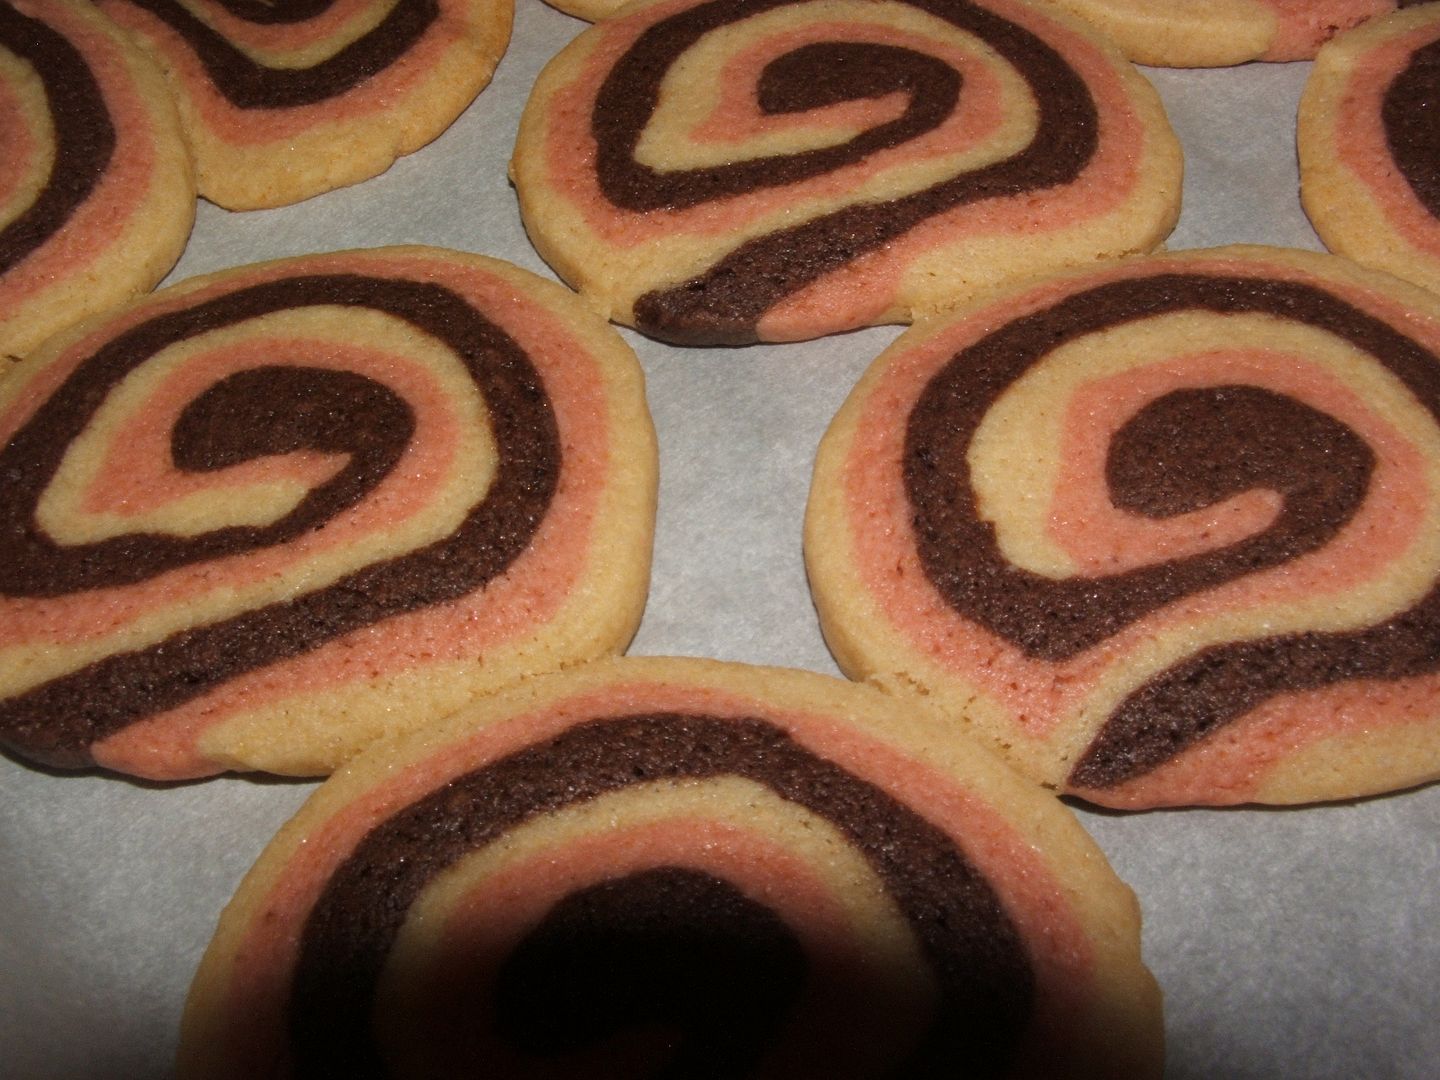 Neapolitan Swirl Refrigerator Cookies by Angie Ouellette-Tower for godsgrowinggarden.com photo 023_zpsele11n2r.jpg